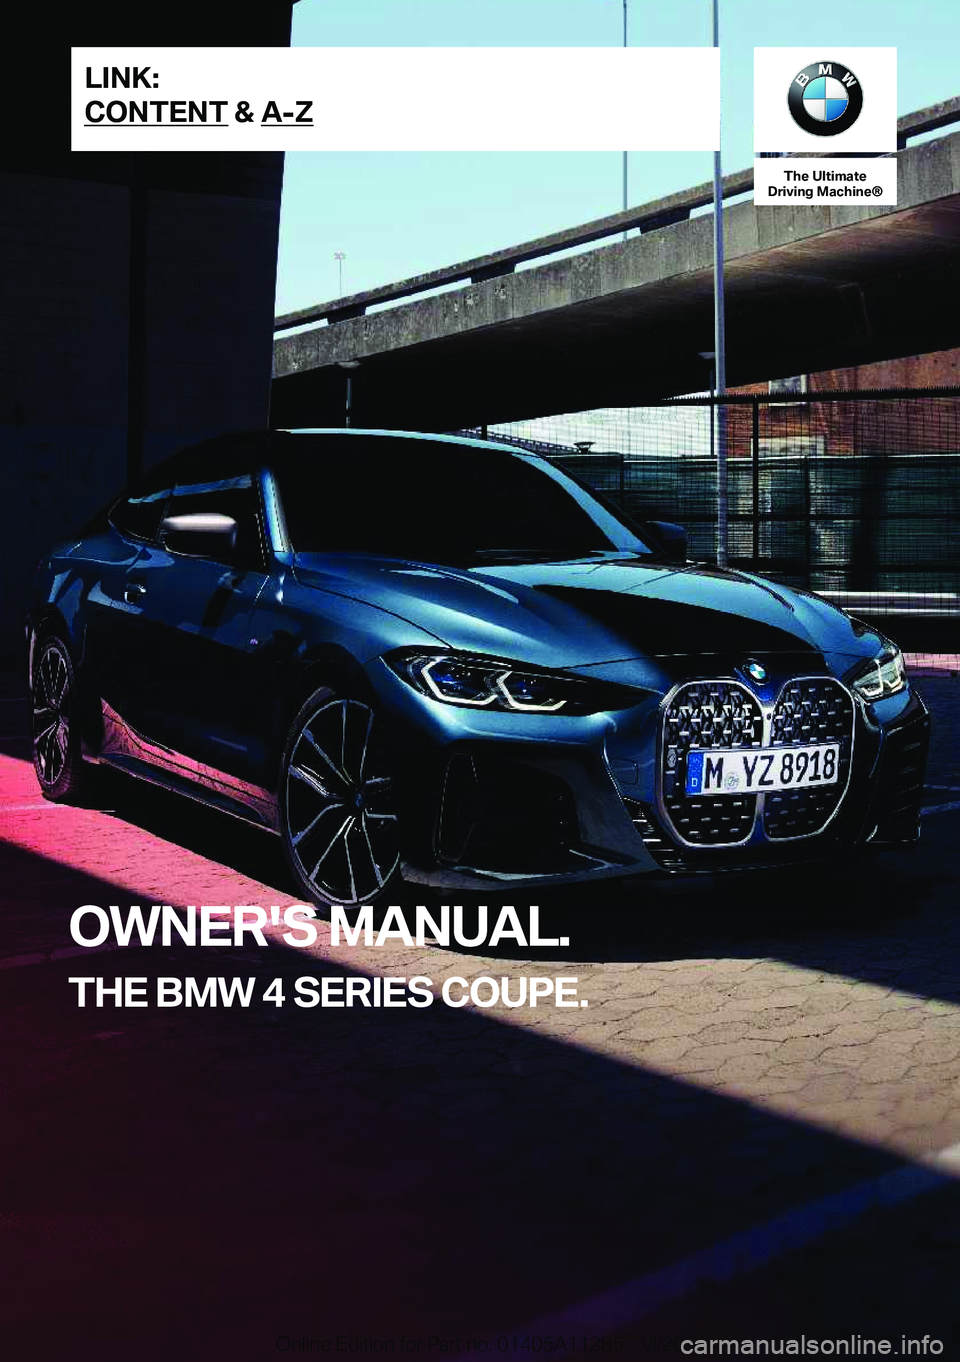 BMW 4 SERIES COUPE 2021  Owners Manual �T�h�e��U�l�t�i�m�a�t�e
�D�r�i�v�i�n�g��M�a�c�h�i�n�e�n
�O�W�N�E�R�'�S��M�A�N�U�A�L�.
�T�H�E��B�M�W��4��S�E�R�I�E�S��C�O�U�P�E�.�L�I�N�K�:
�C�O�N�T�E�N�T��&��A�-�Z�O�n�l�i�n�e��E�d�i�t�i